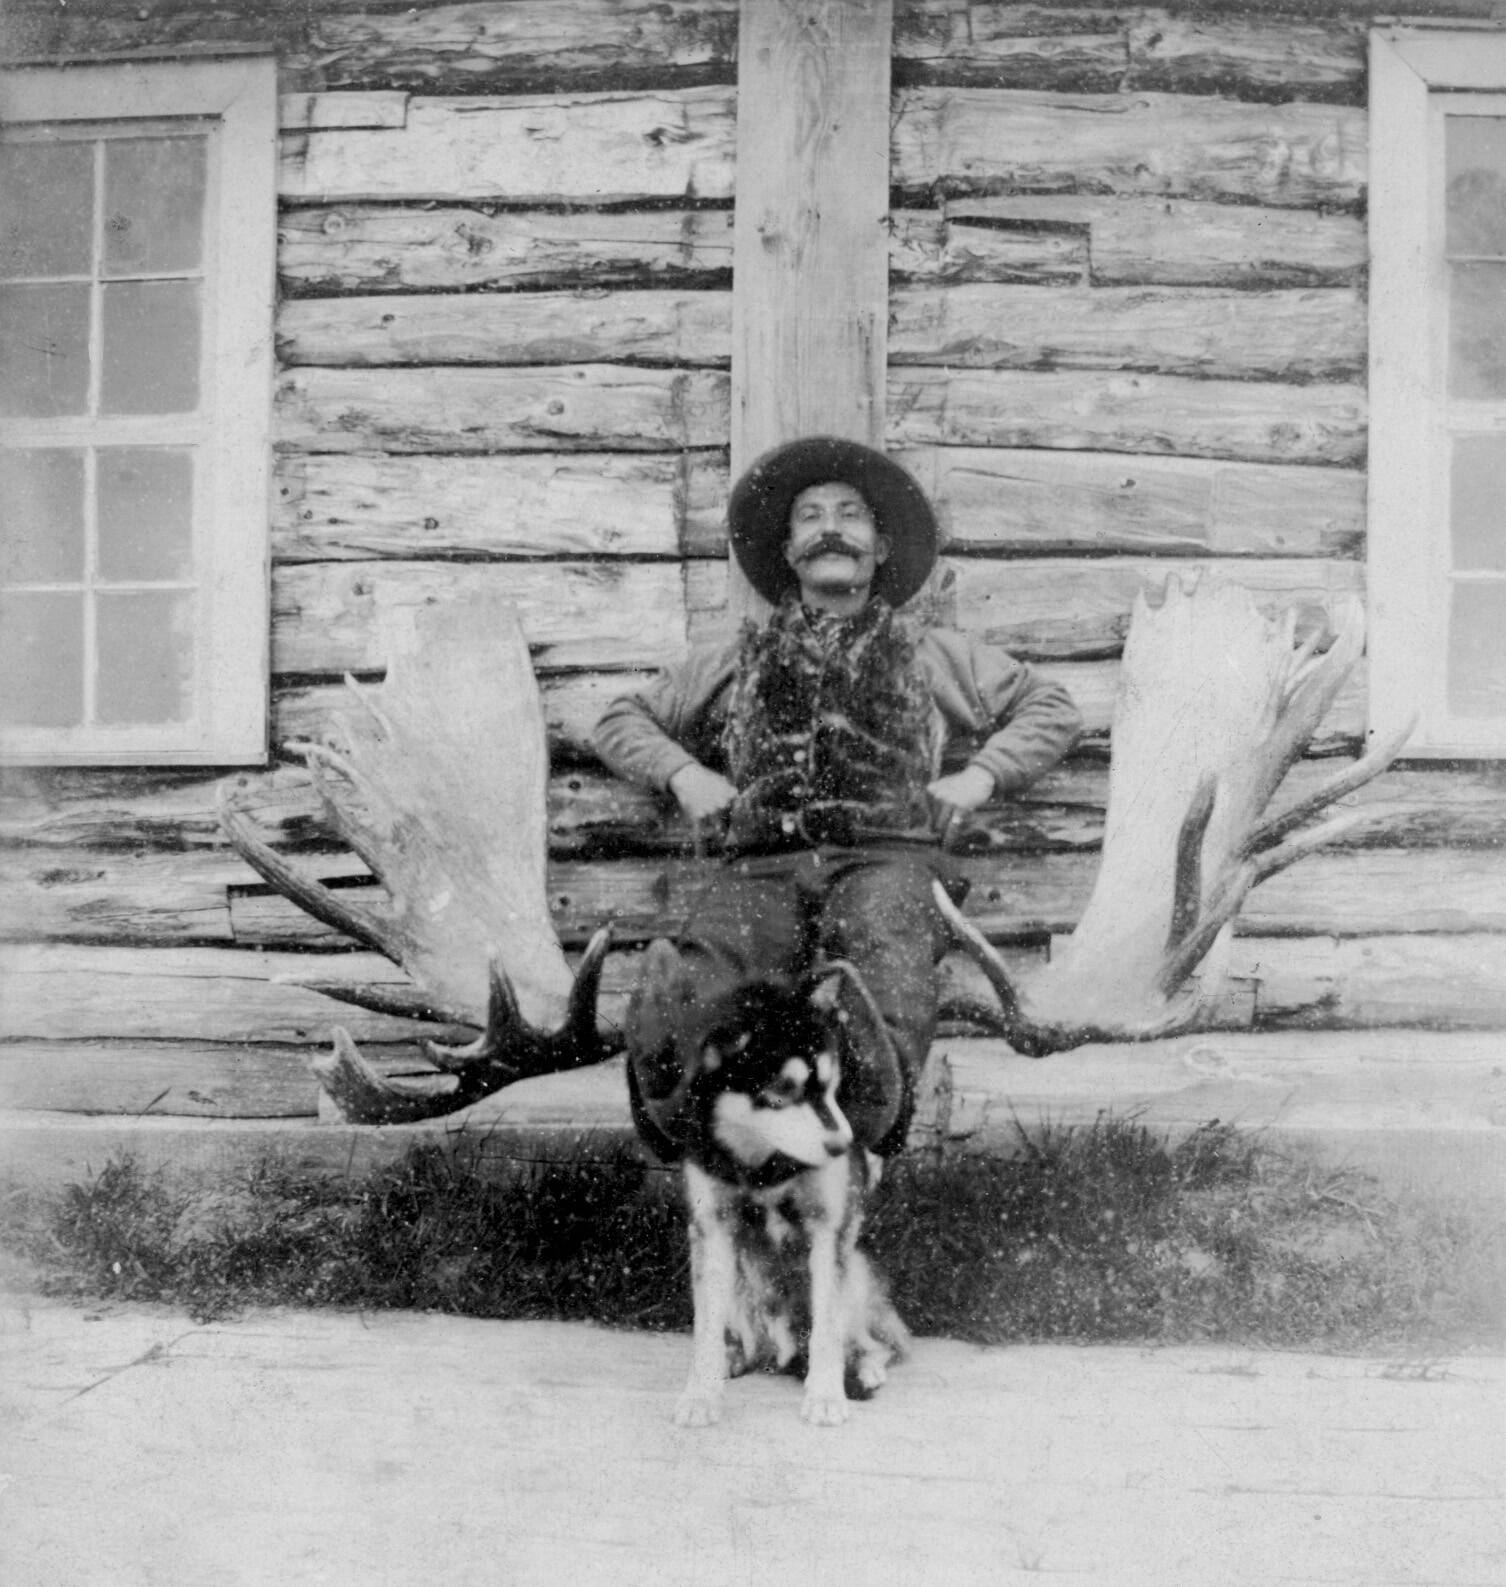 Frenchy Vian is seen here in Kenai in about 1899, a year or so before Bill Dawson took up residence there.